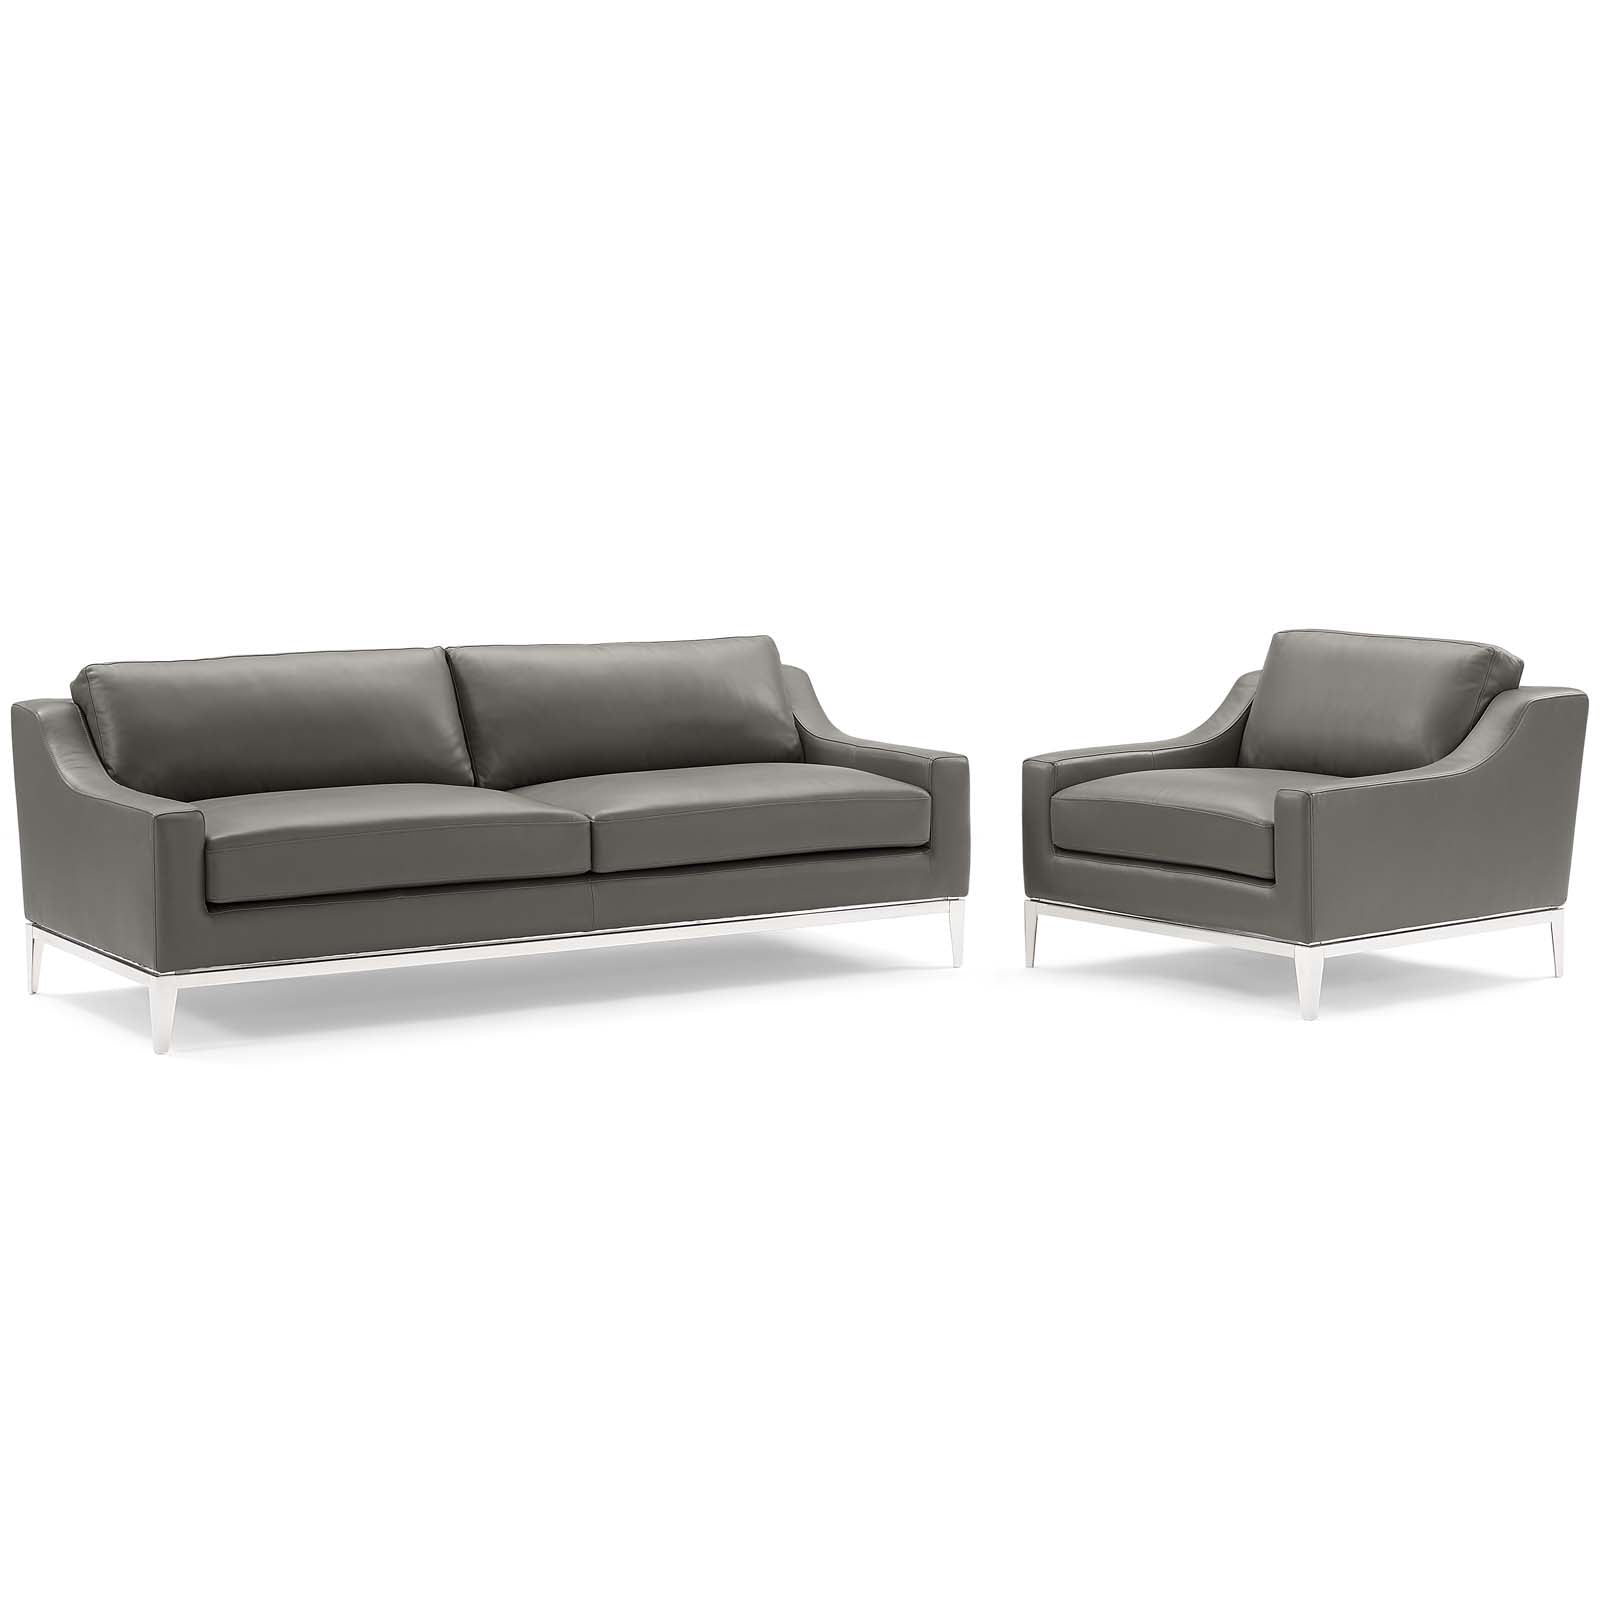 Modway Living Room Sets - Harness Stainless Steel Base Leather Sofa & Armchair Set Gray